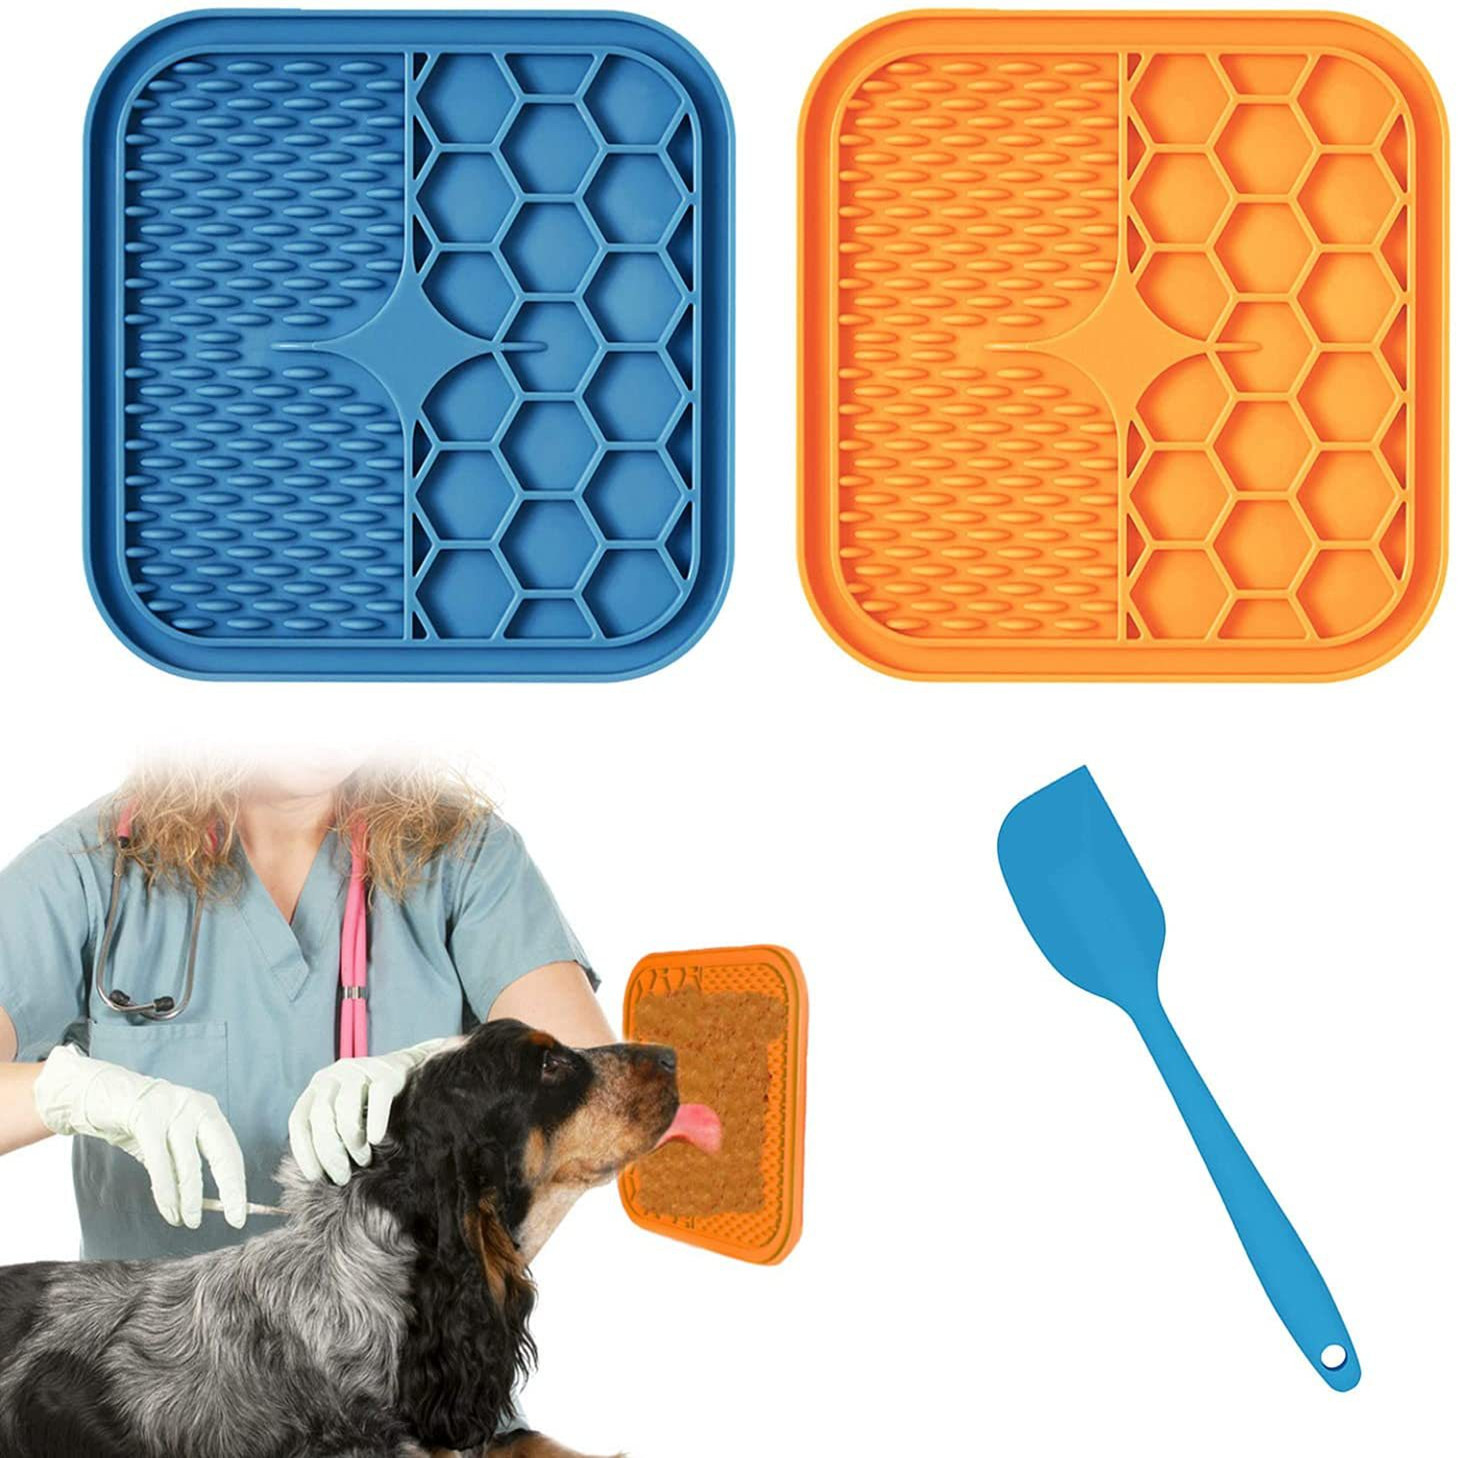 The Benefits of Dog Lick Mats - Anxiety Relief and More for your